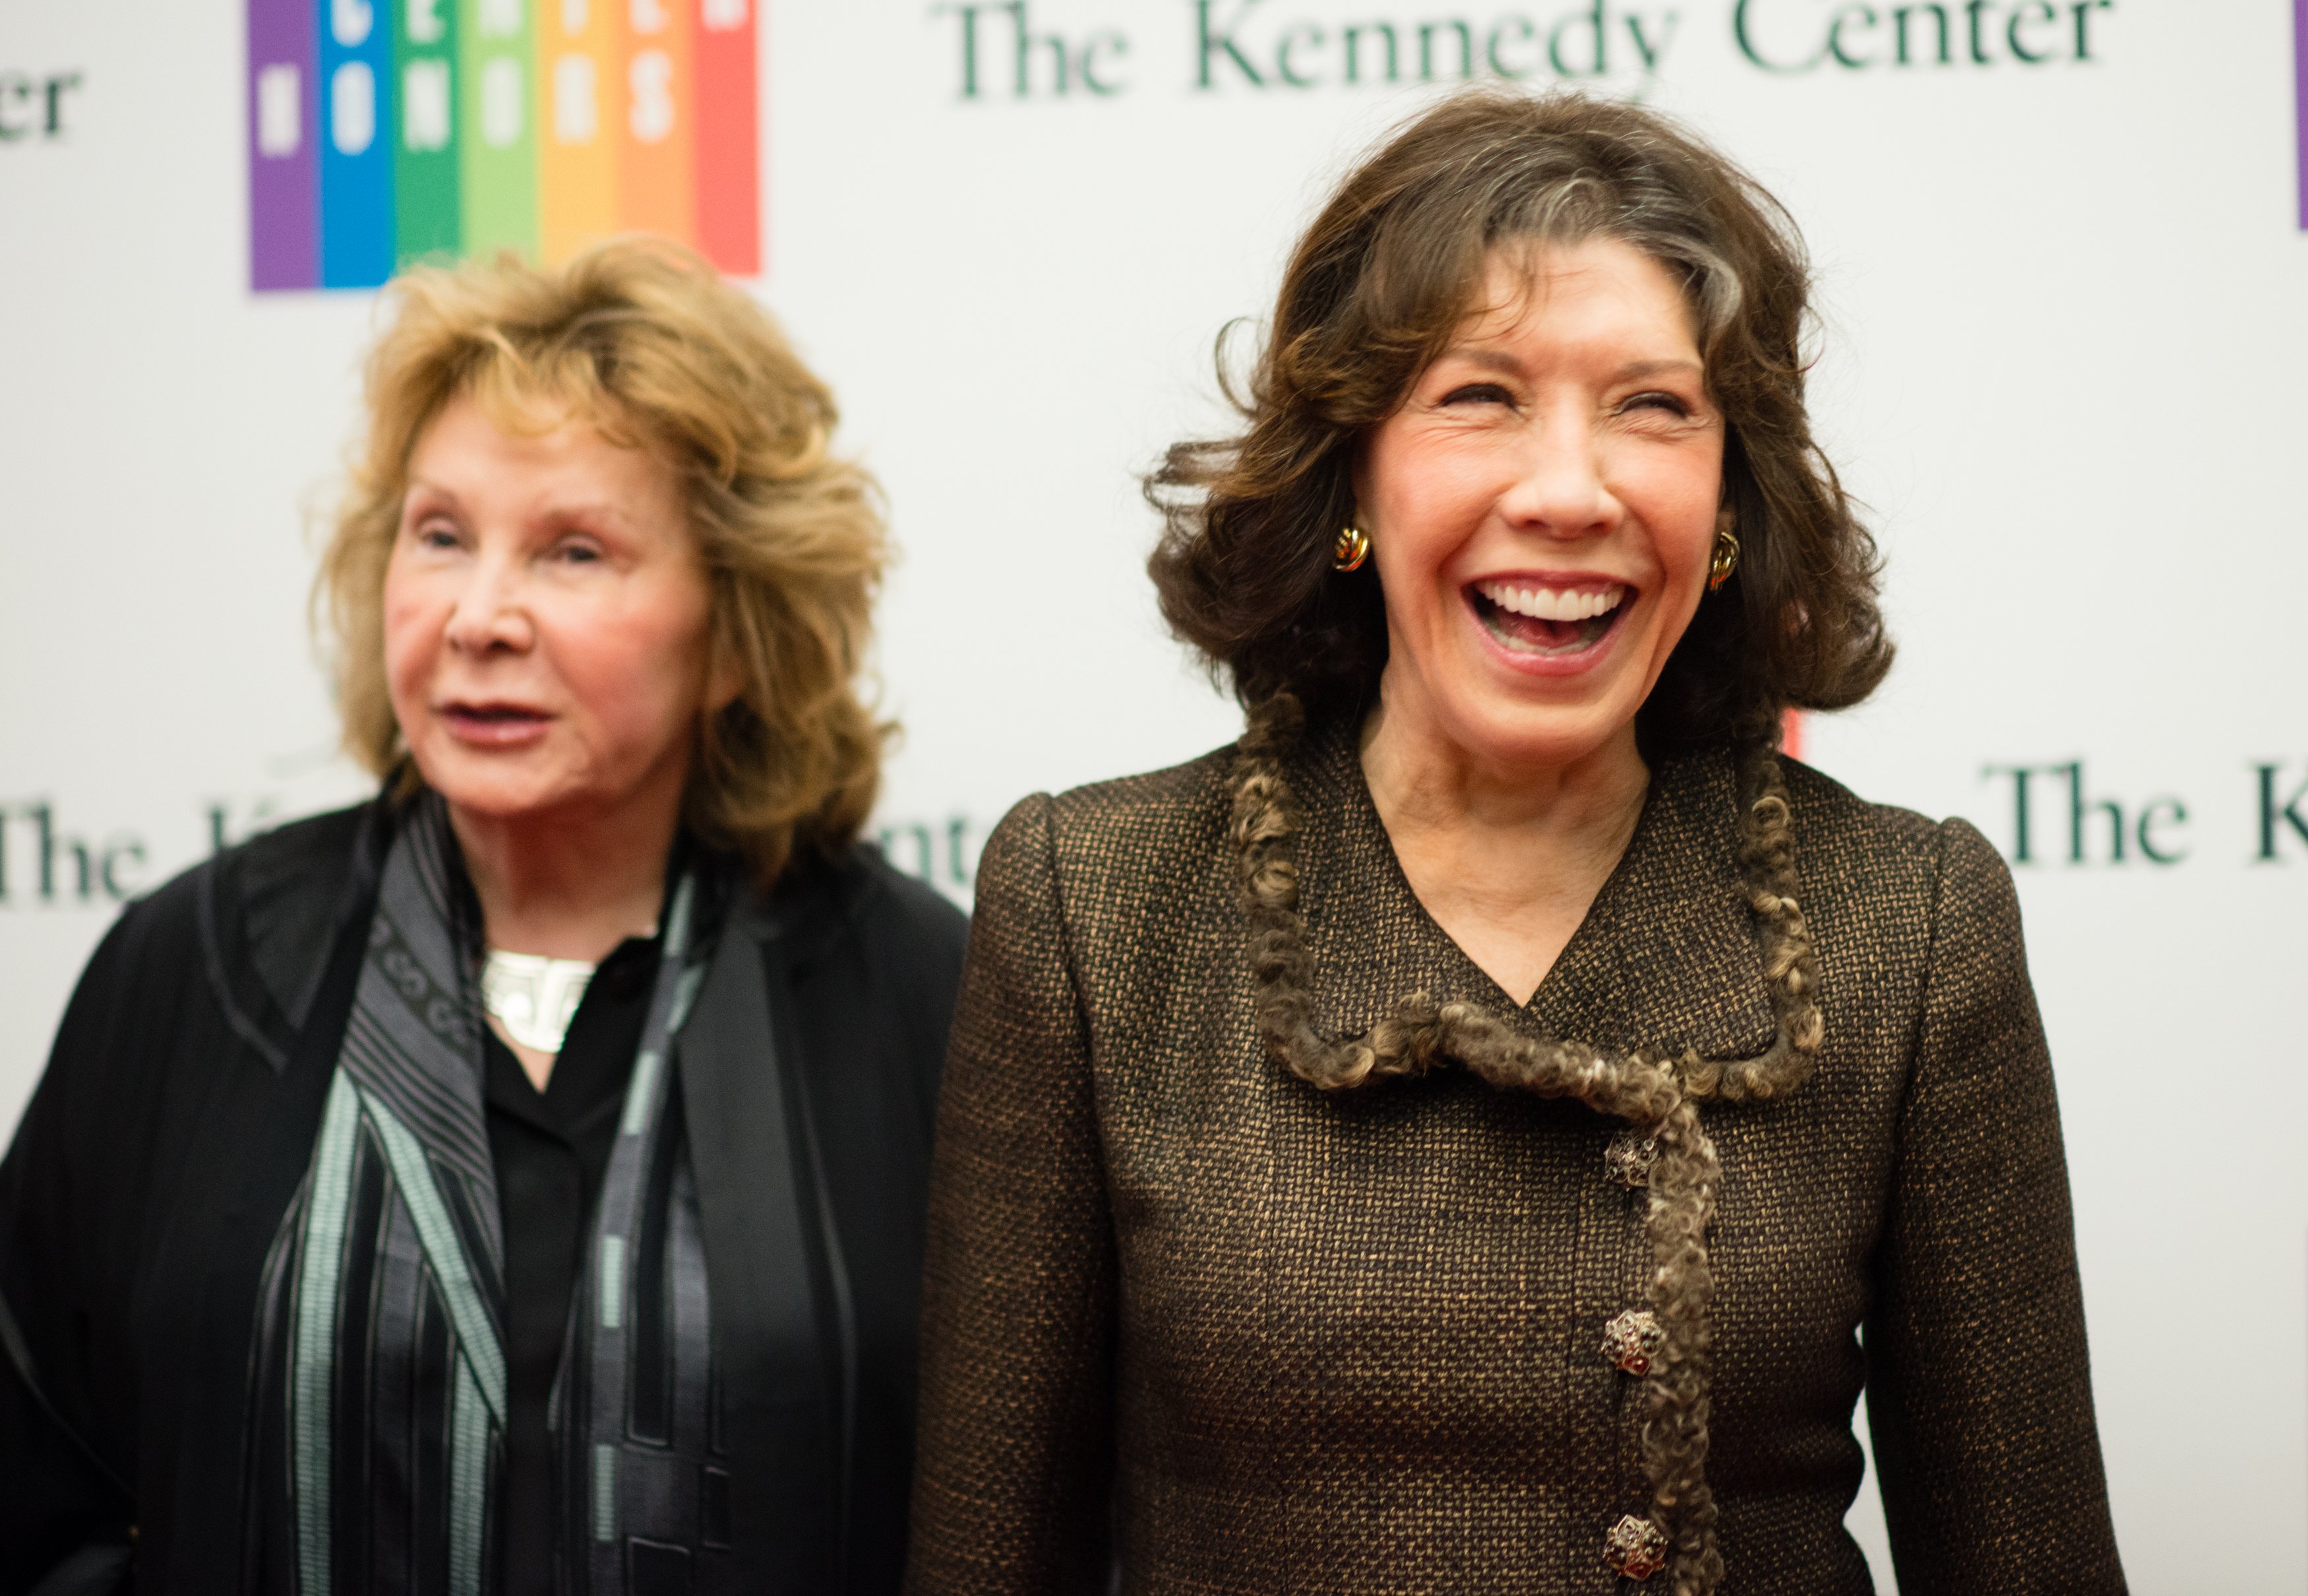 Jane Wagner and Honoree Lily Tomlin at the Kennedy Center Honorees dinner event in Washington D.C. on December 6, 2014. | Source: Sarah L. Voisin/The Washington Post/Getty Images